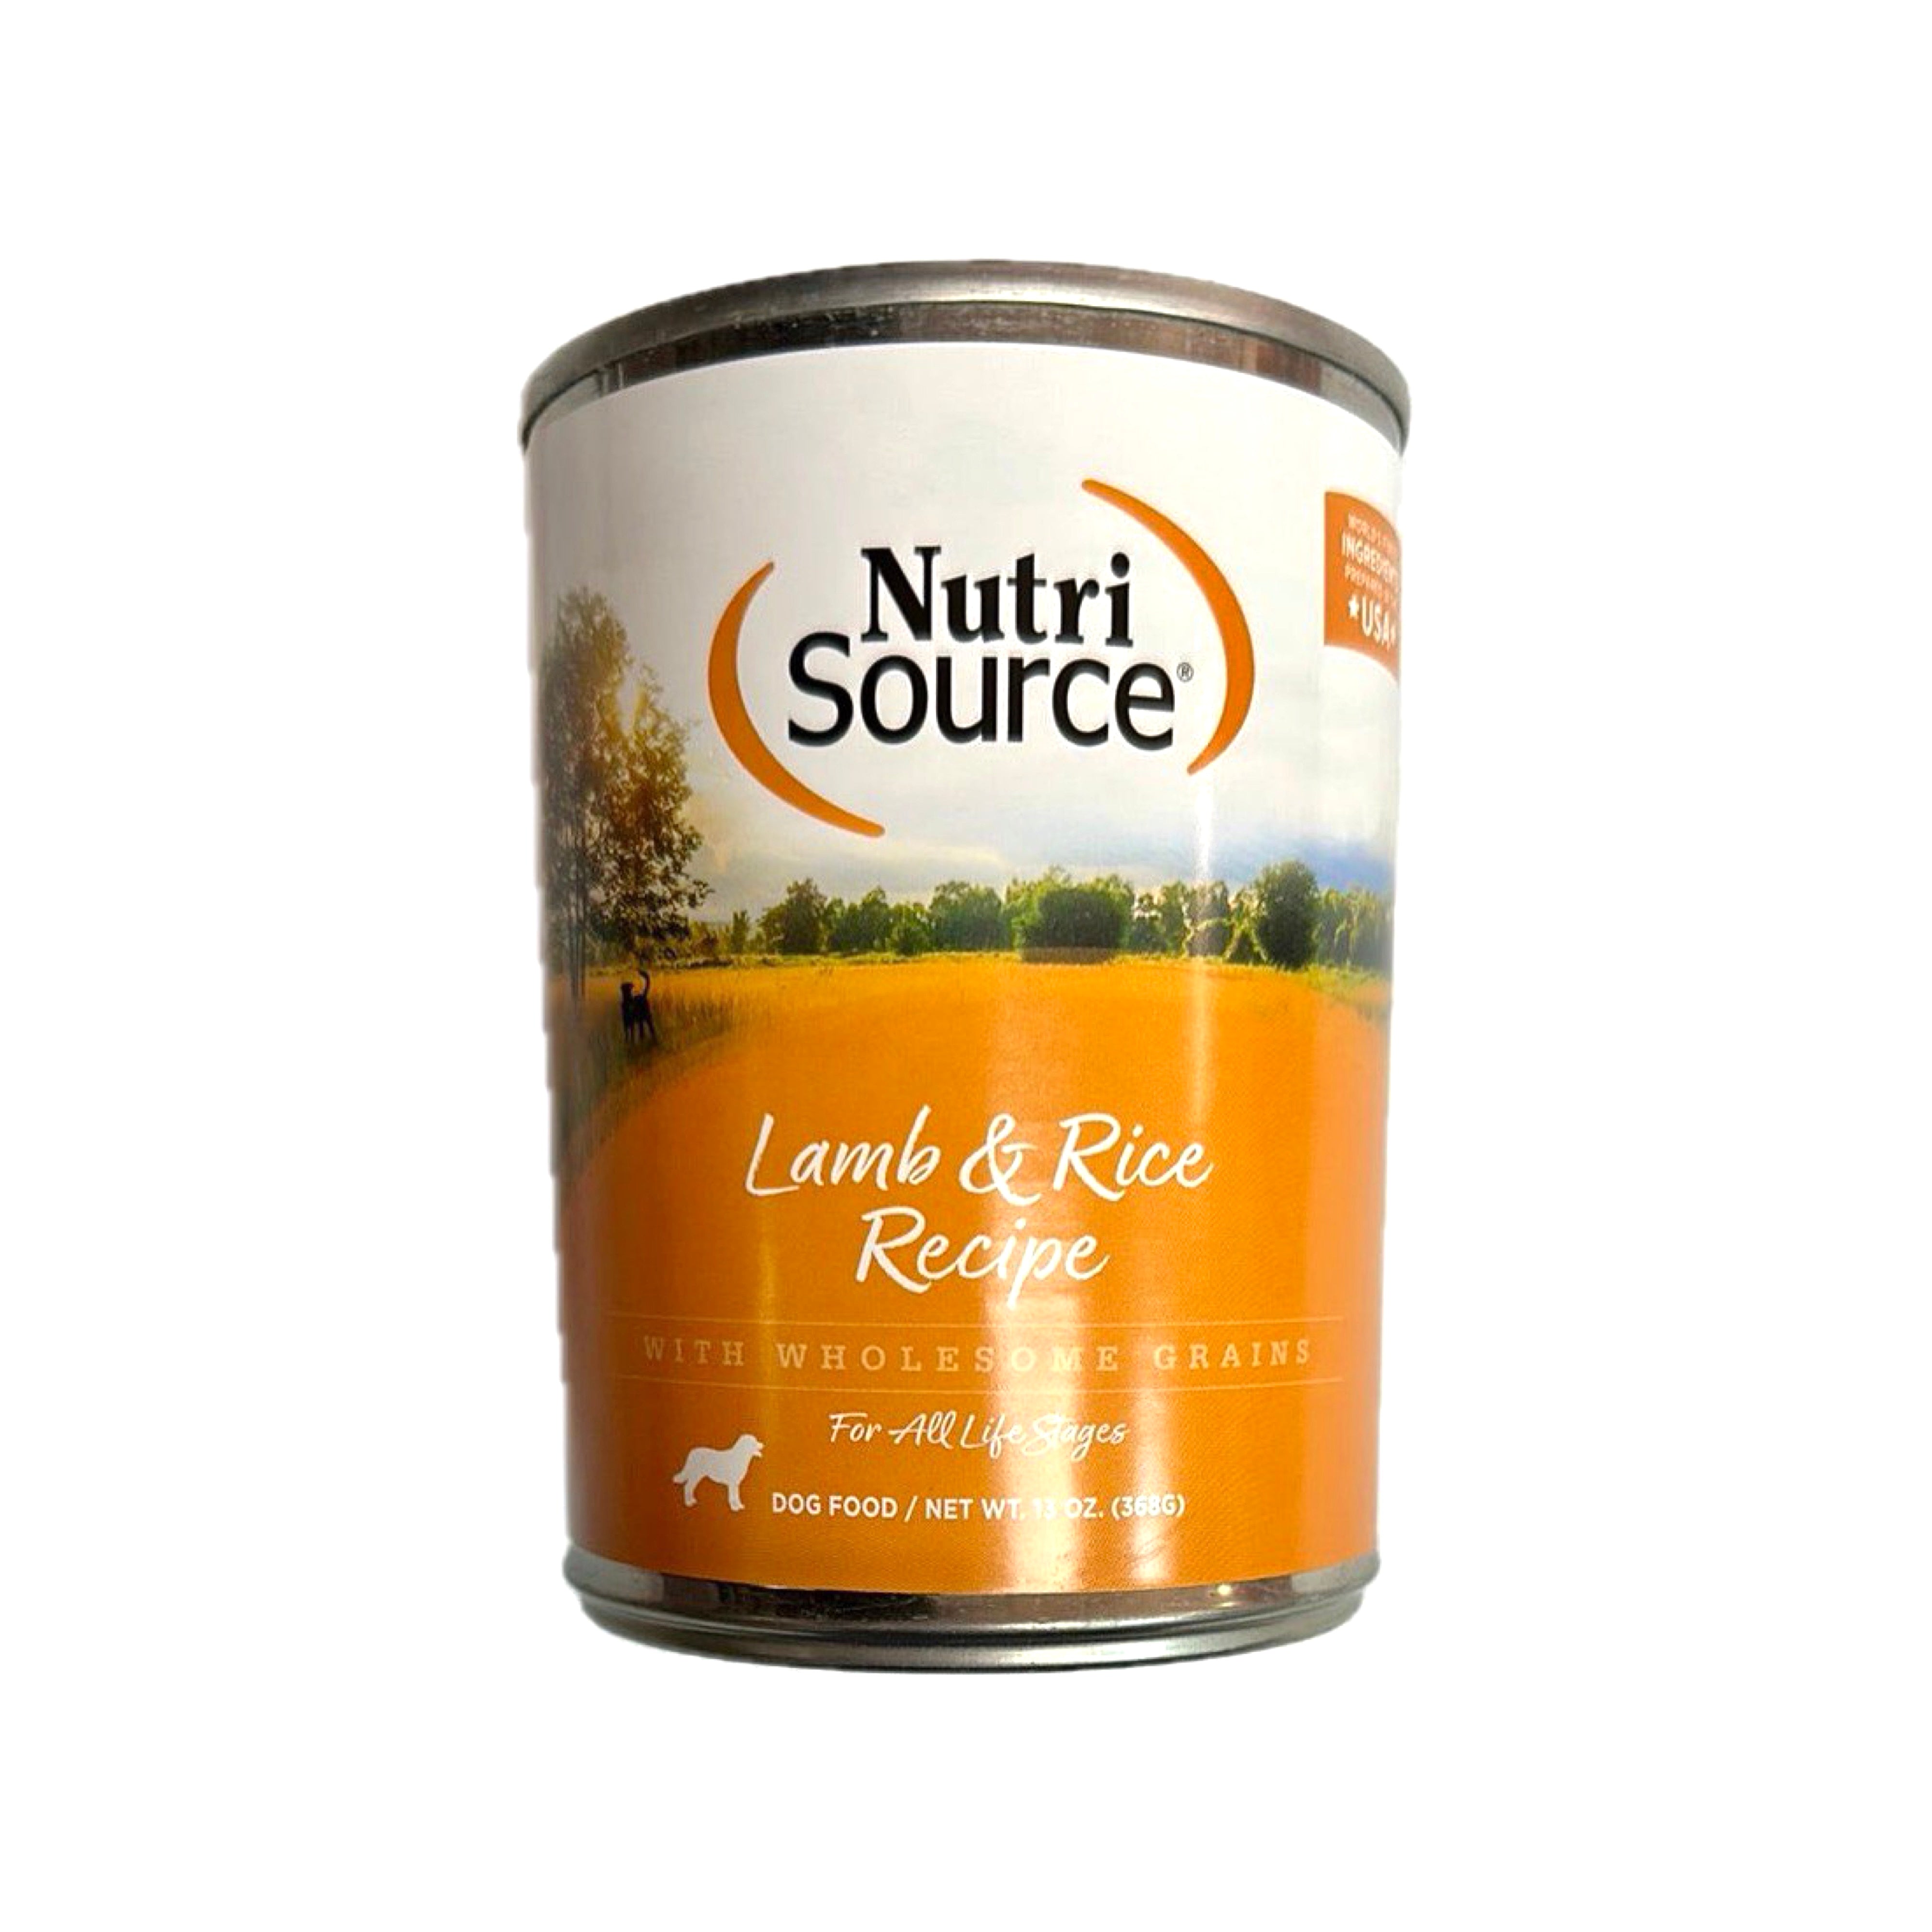 NutriSource Lamb & Rice Recipe with Wholesome Grains Canned Dog Food